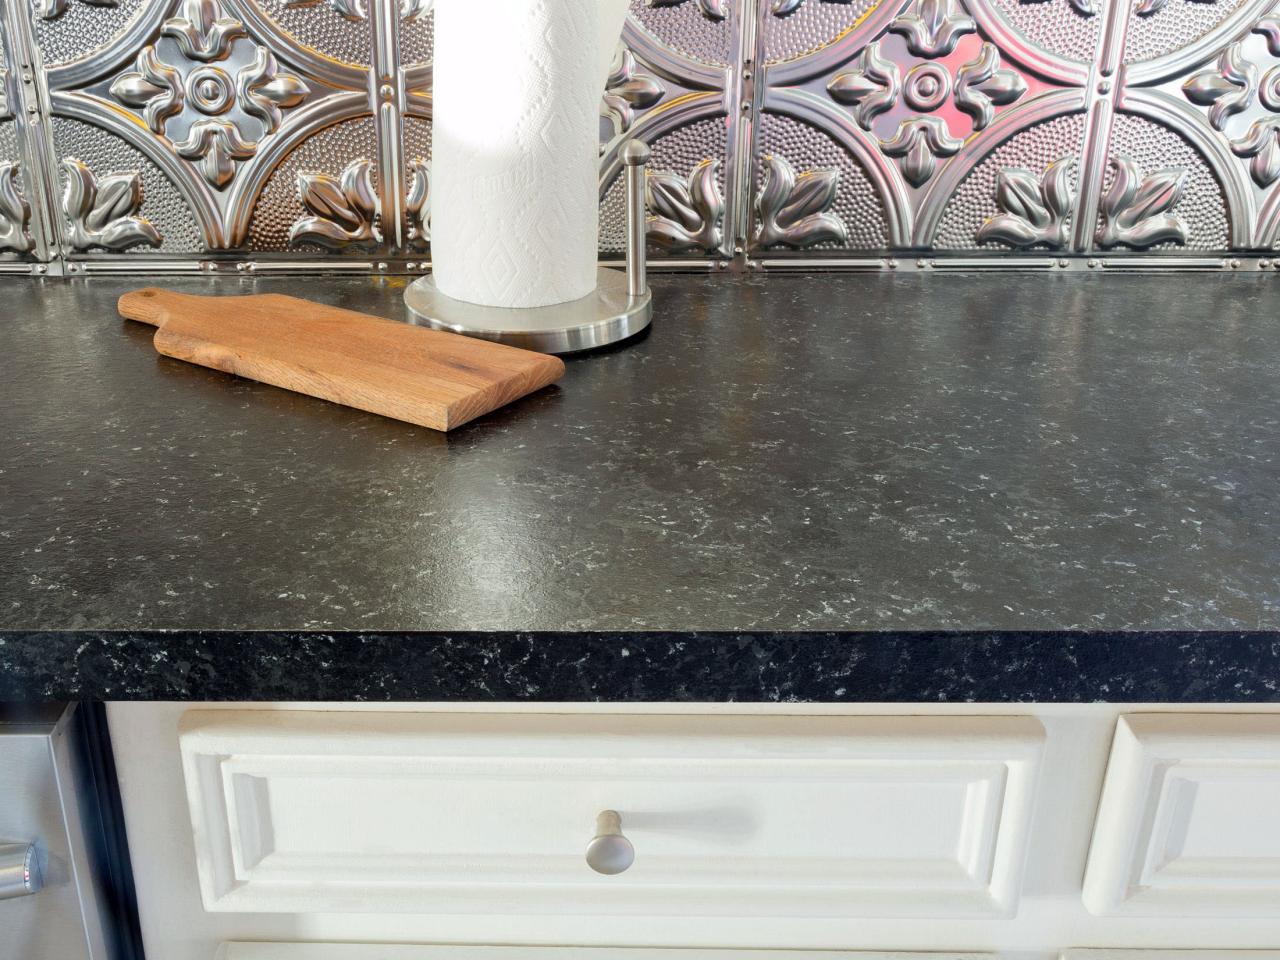 How To Paint A Laminate Countertop, How To Paint Faux Wood Countertops